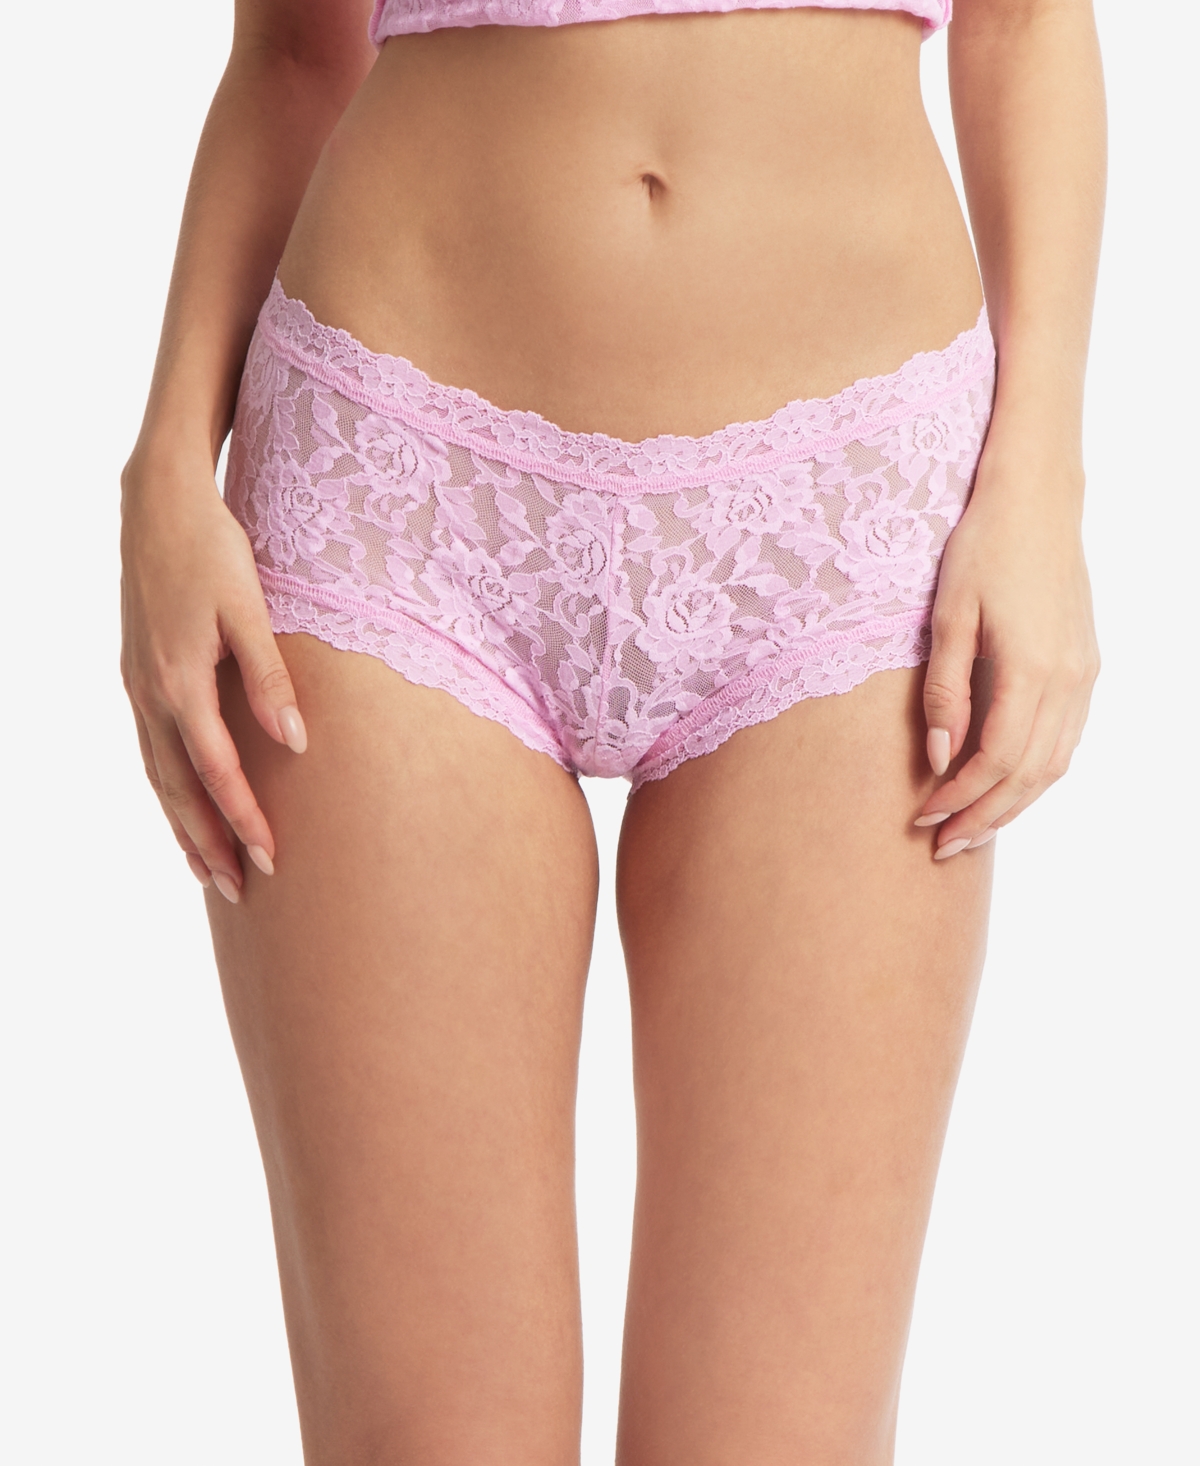 Shop Hanky Panky Women's Signature Lace Boy Short, 4812 In Cotton Candy Pink